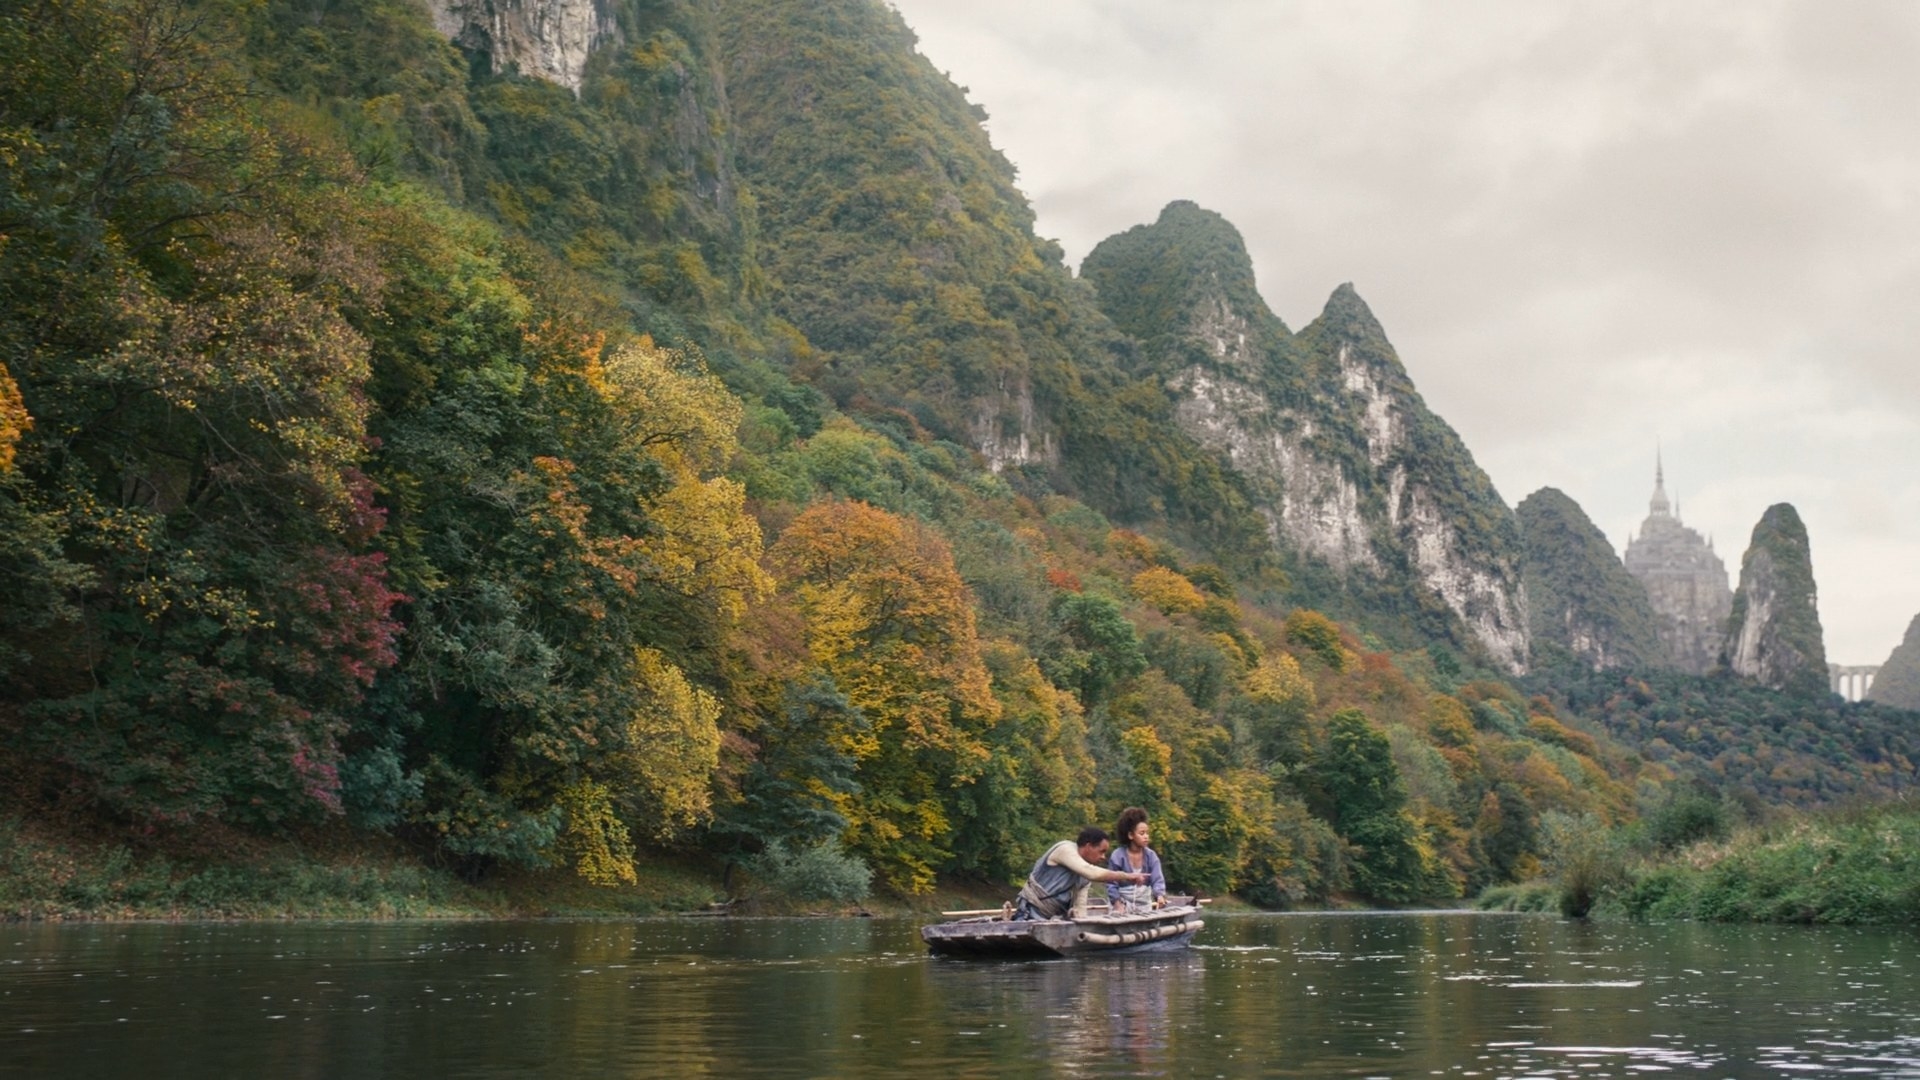 A shot of young Siuan and her father in a fishing skiff on the river. In the background, nearly blending into the mountain peaks, is what appears to be a large fortress.